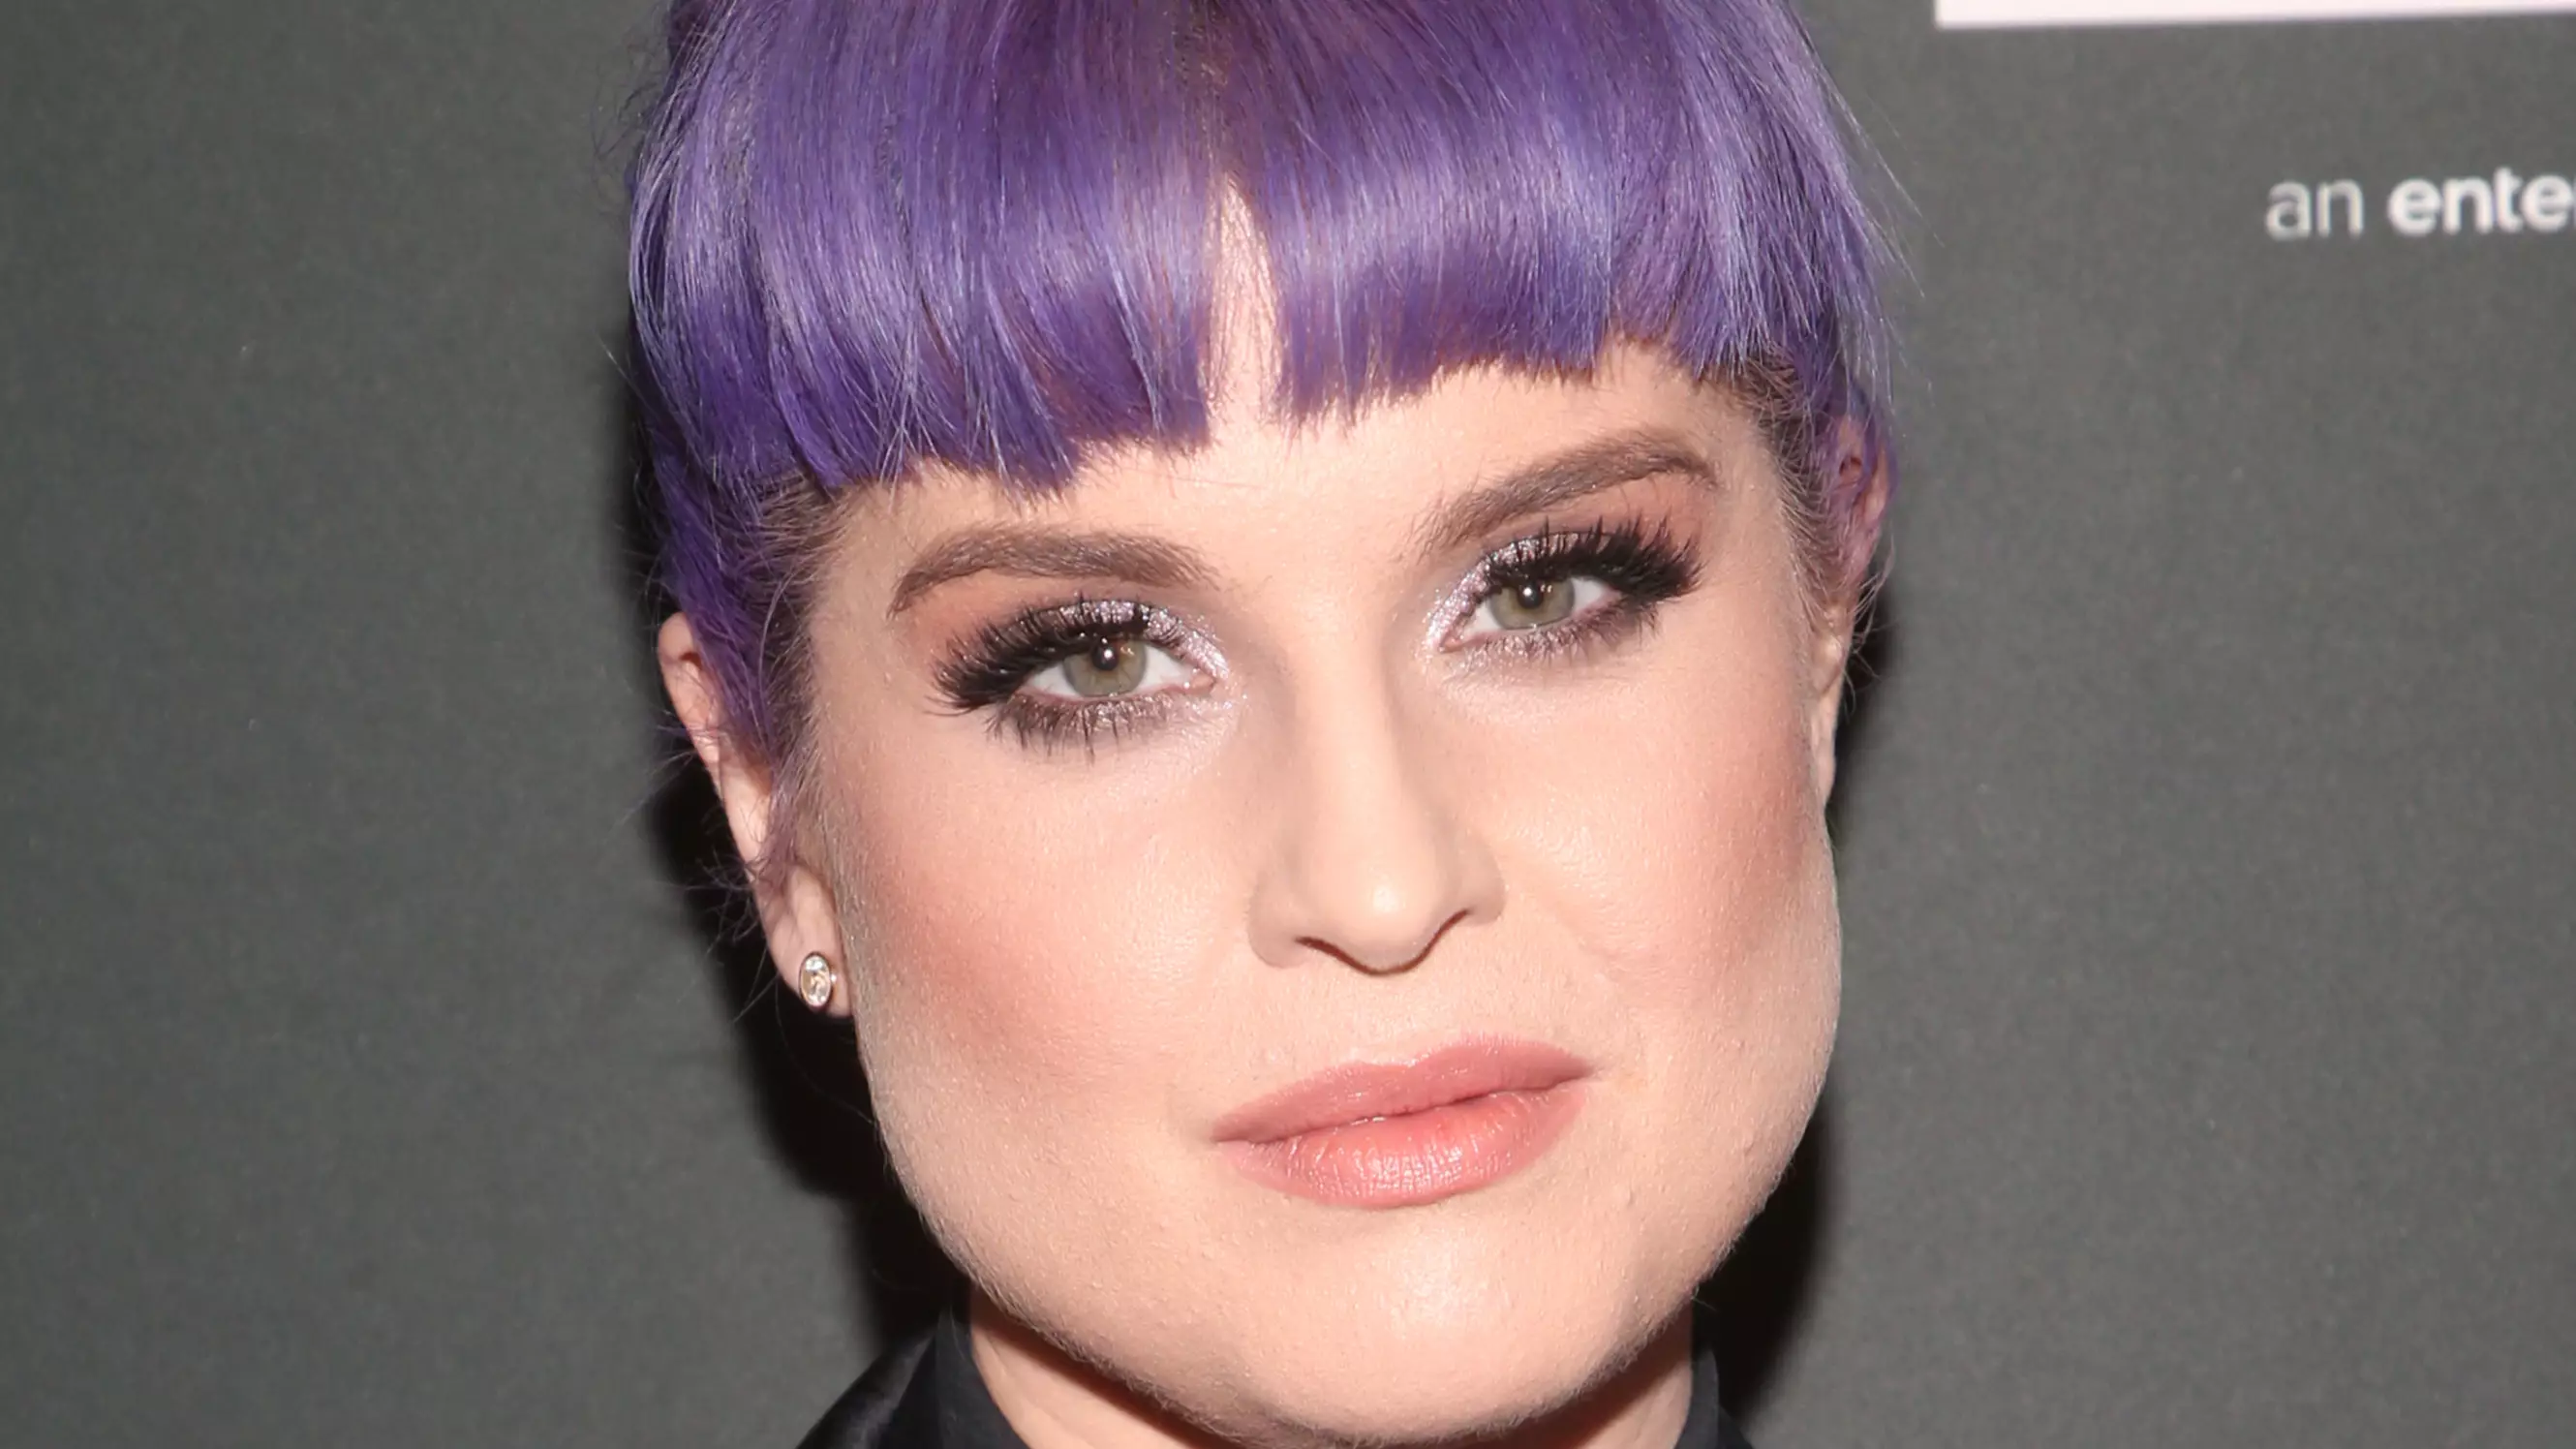 Kelly Osbourne Reveals She Has 'Relapsed' After Four Years Of Sobriety